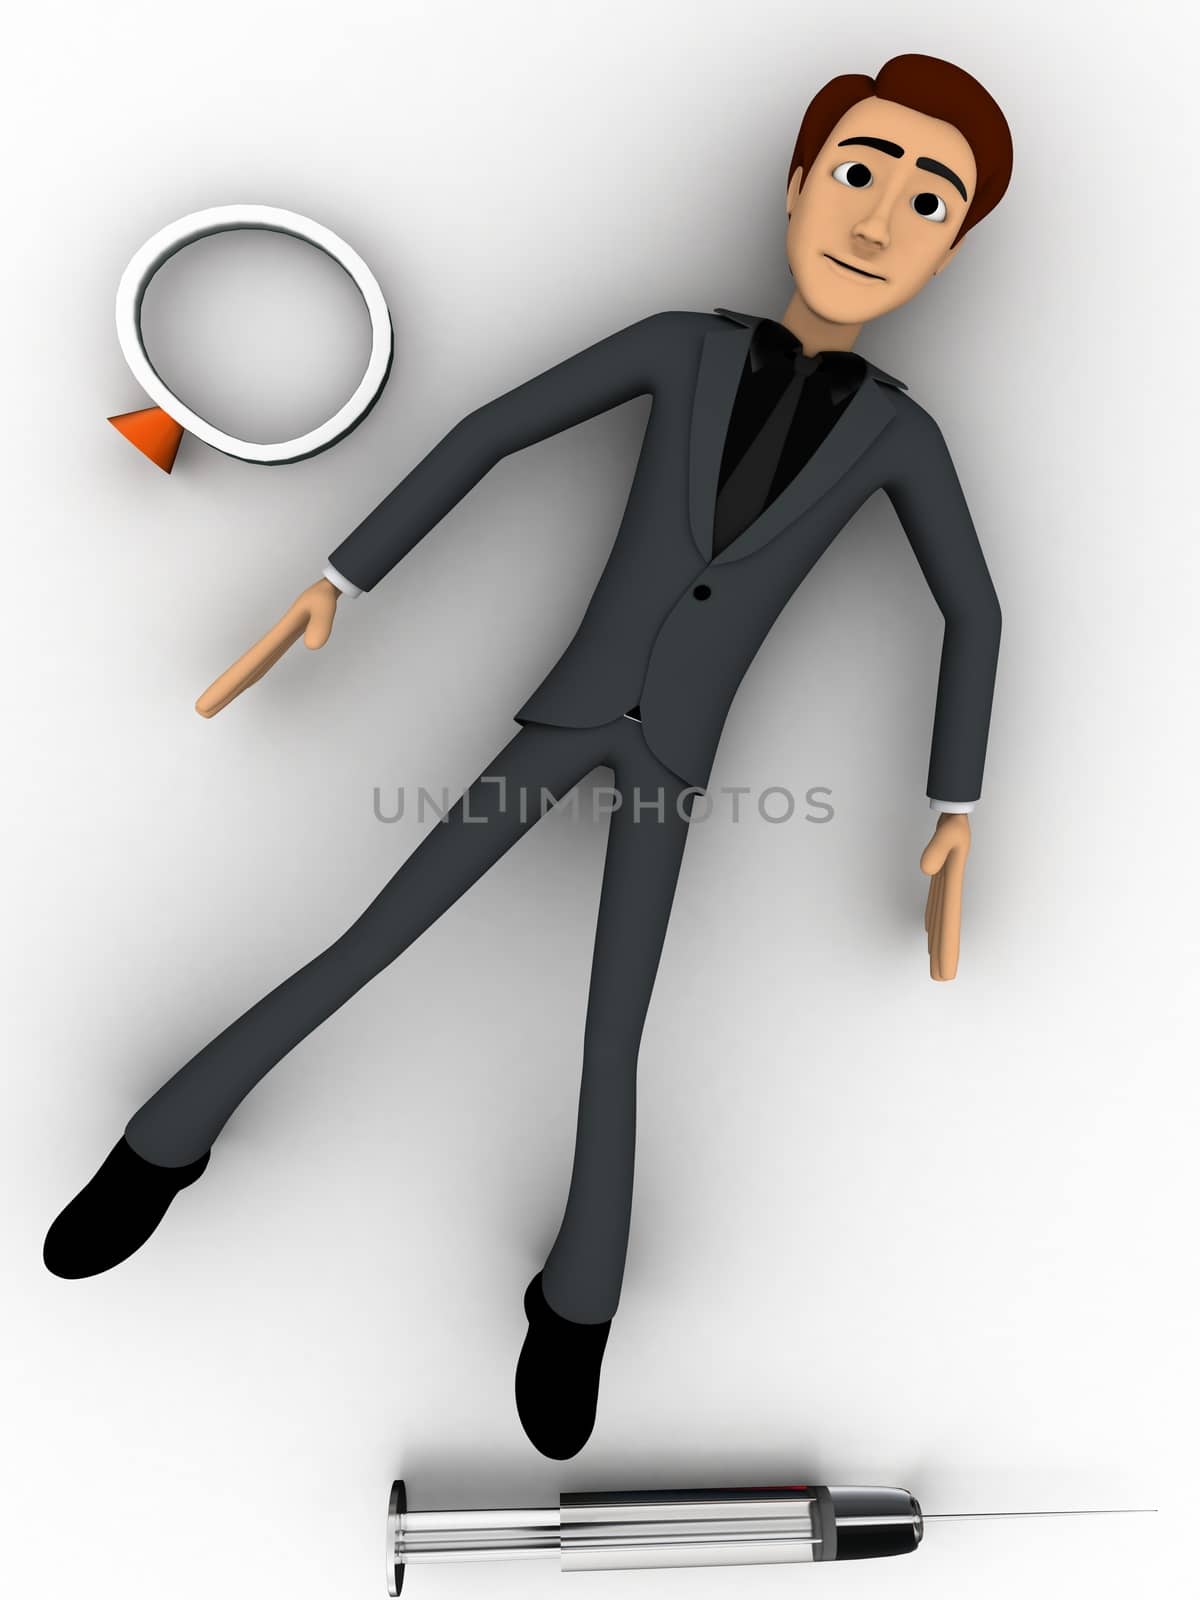 3d man lying on floor with injection and magnifying glass concept by touchmenithin@gmail.com